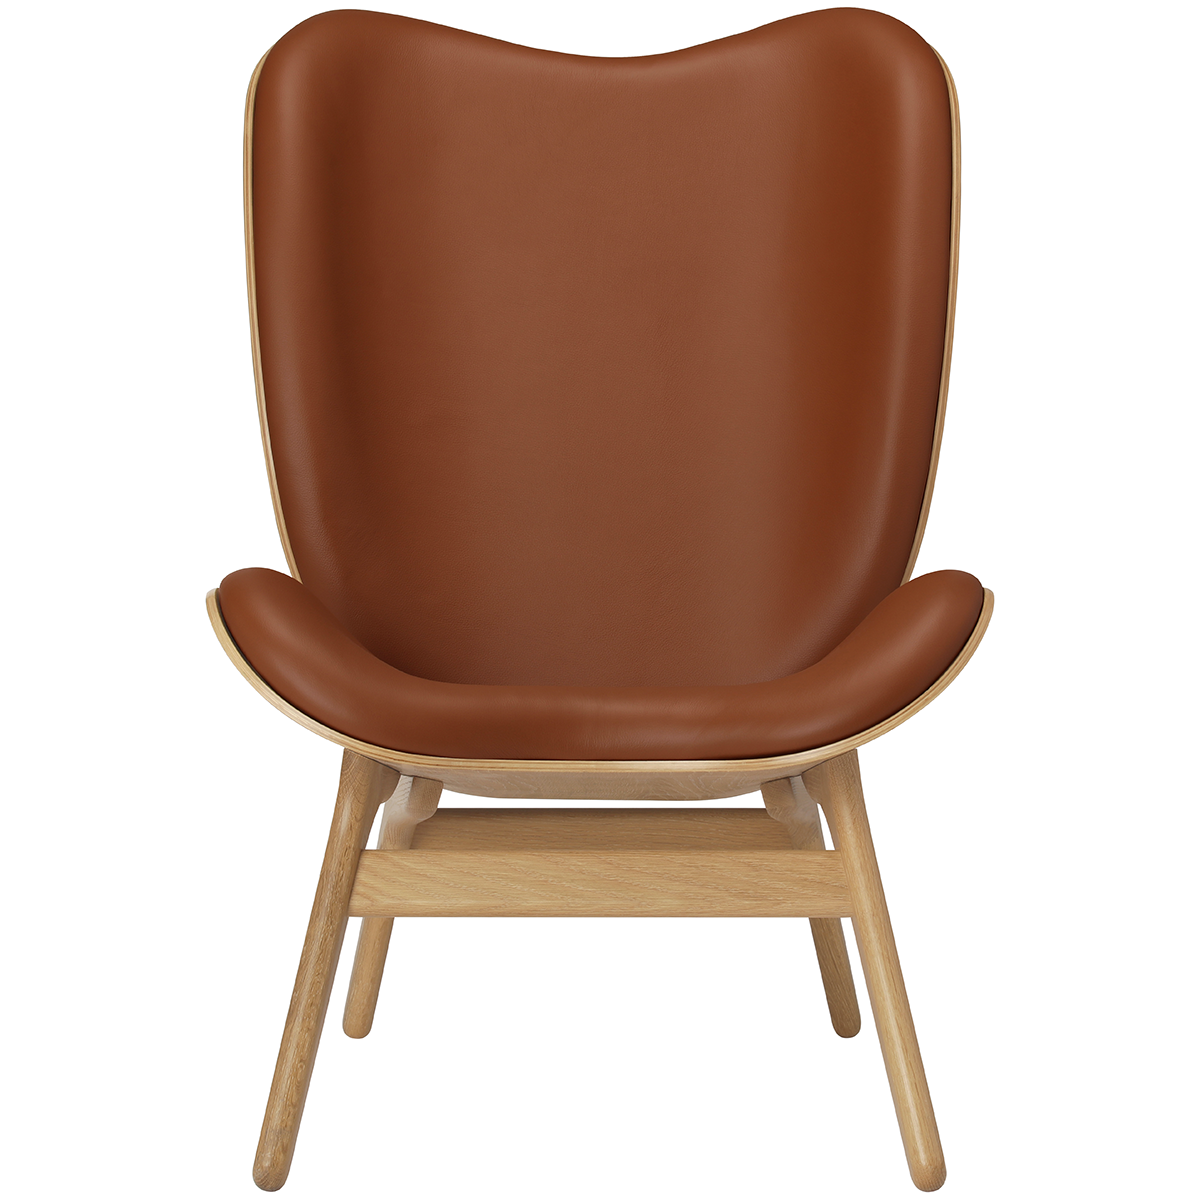 A Conversation Piece Leather Tall Lounge Chair